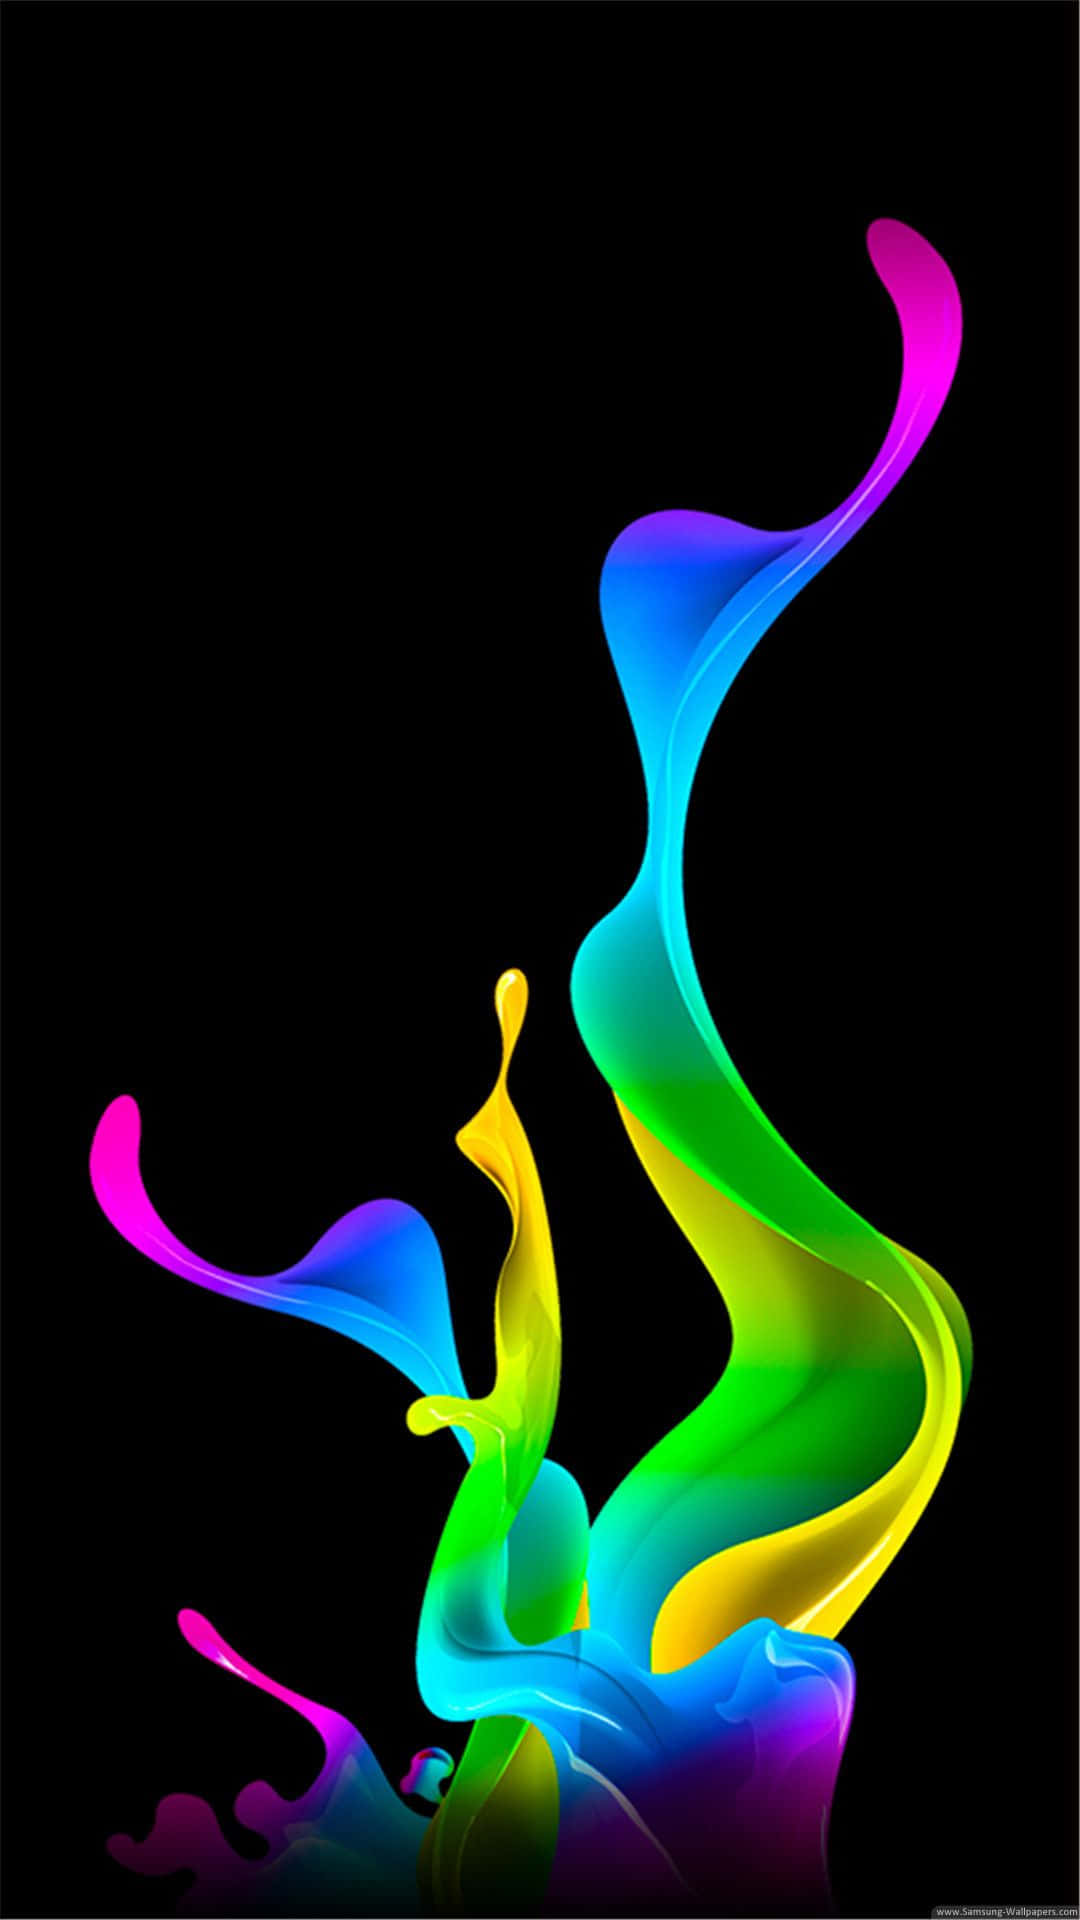 A Colorful Liquid Is Flowing On A Black Background Wallpaper